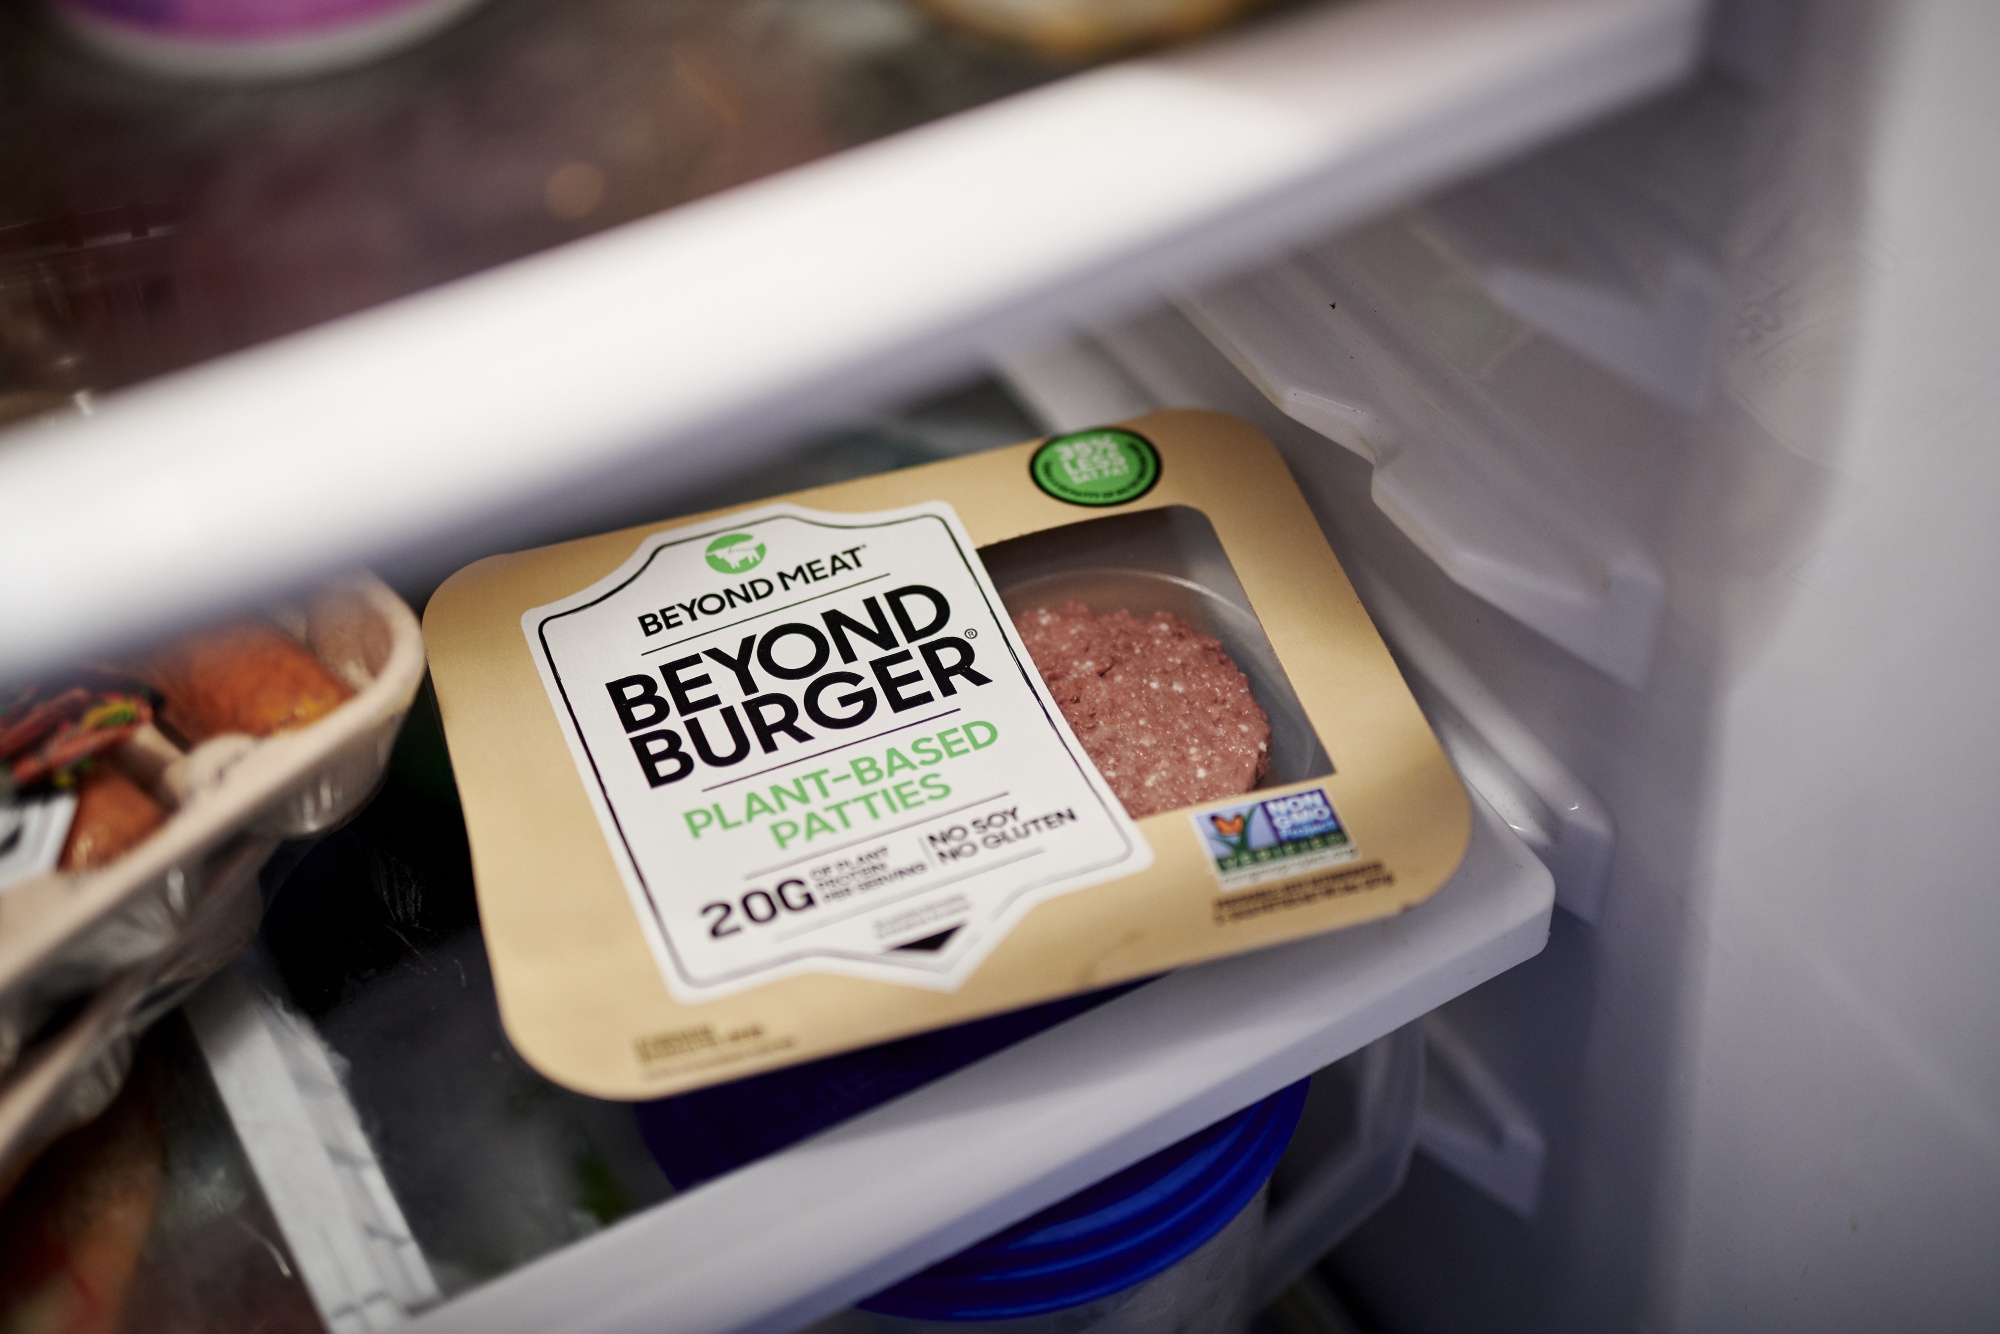 Beyond Meat struggles continue in US, doubles down on EU expansion